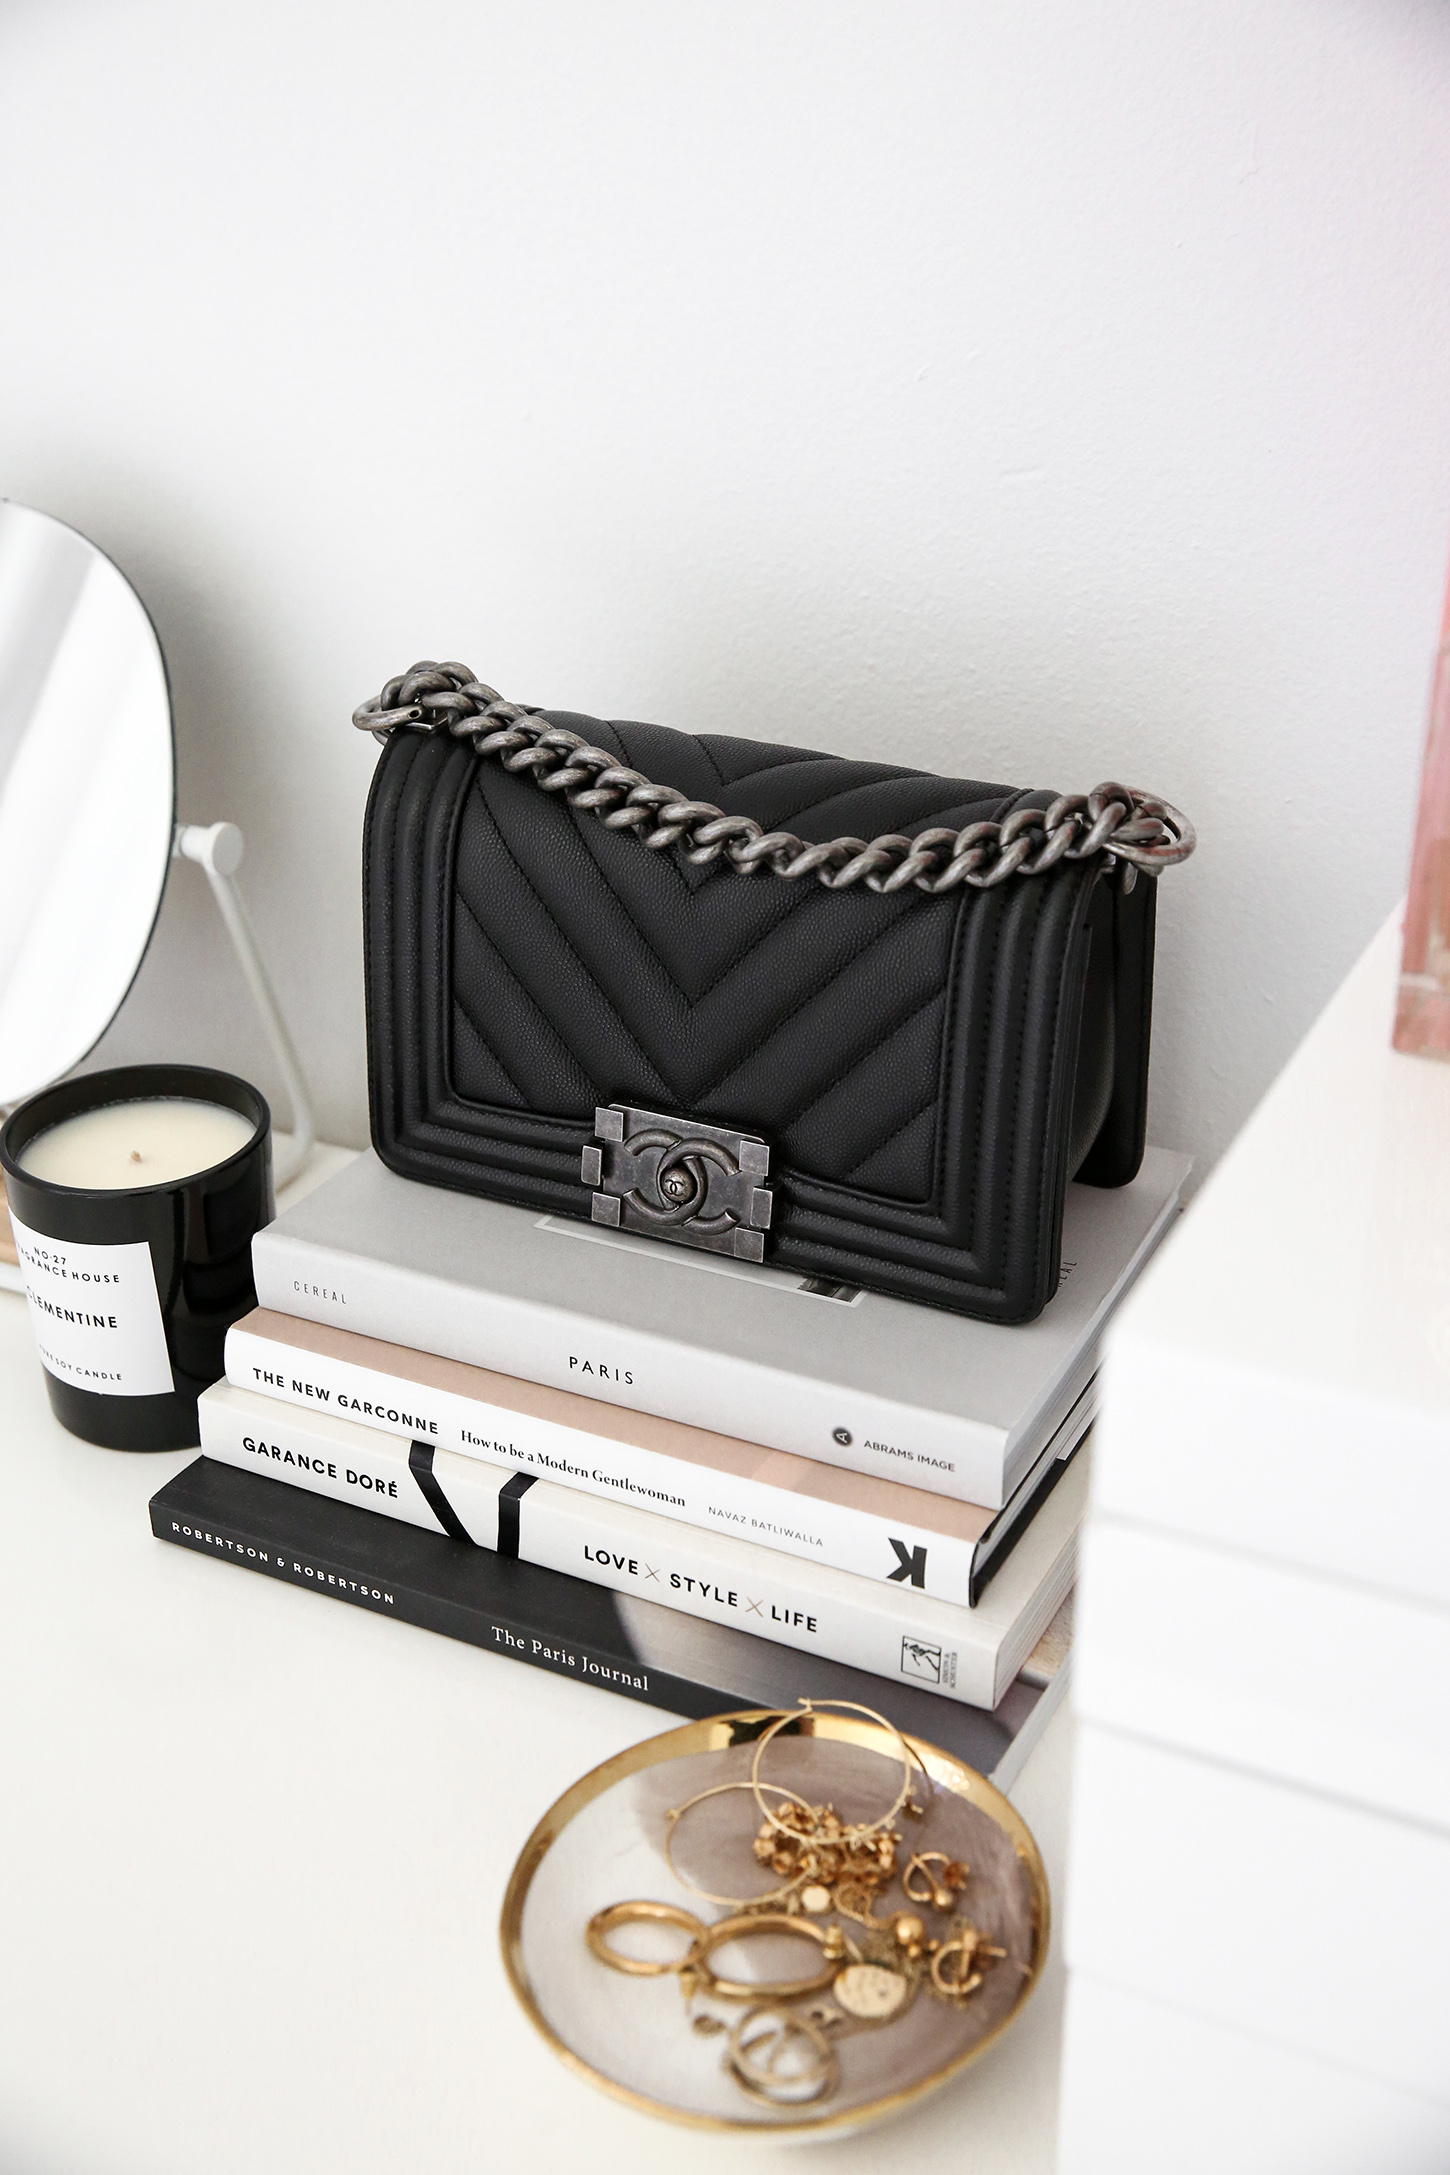 CHANEL HANDBAG COMPARISON  REVIEW  THE CHANEL BOY BAG AND THE CHANEL  CLASSIC FLAP BAG  YouTube